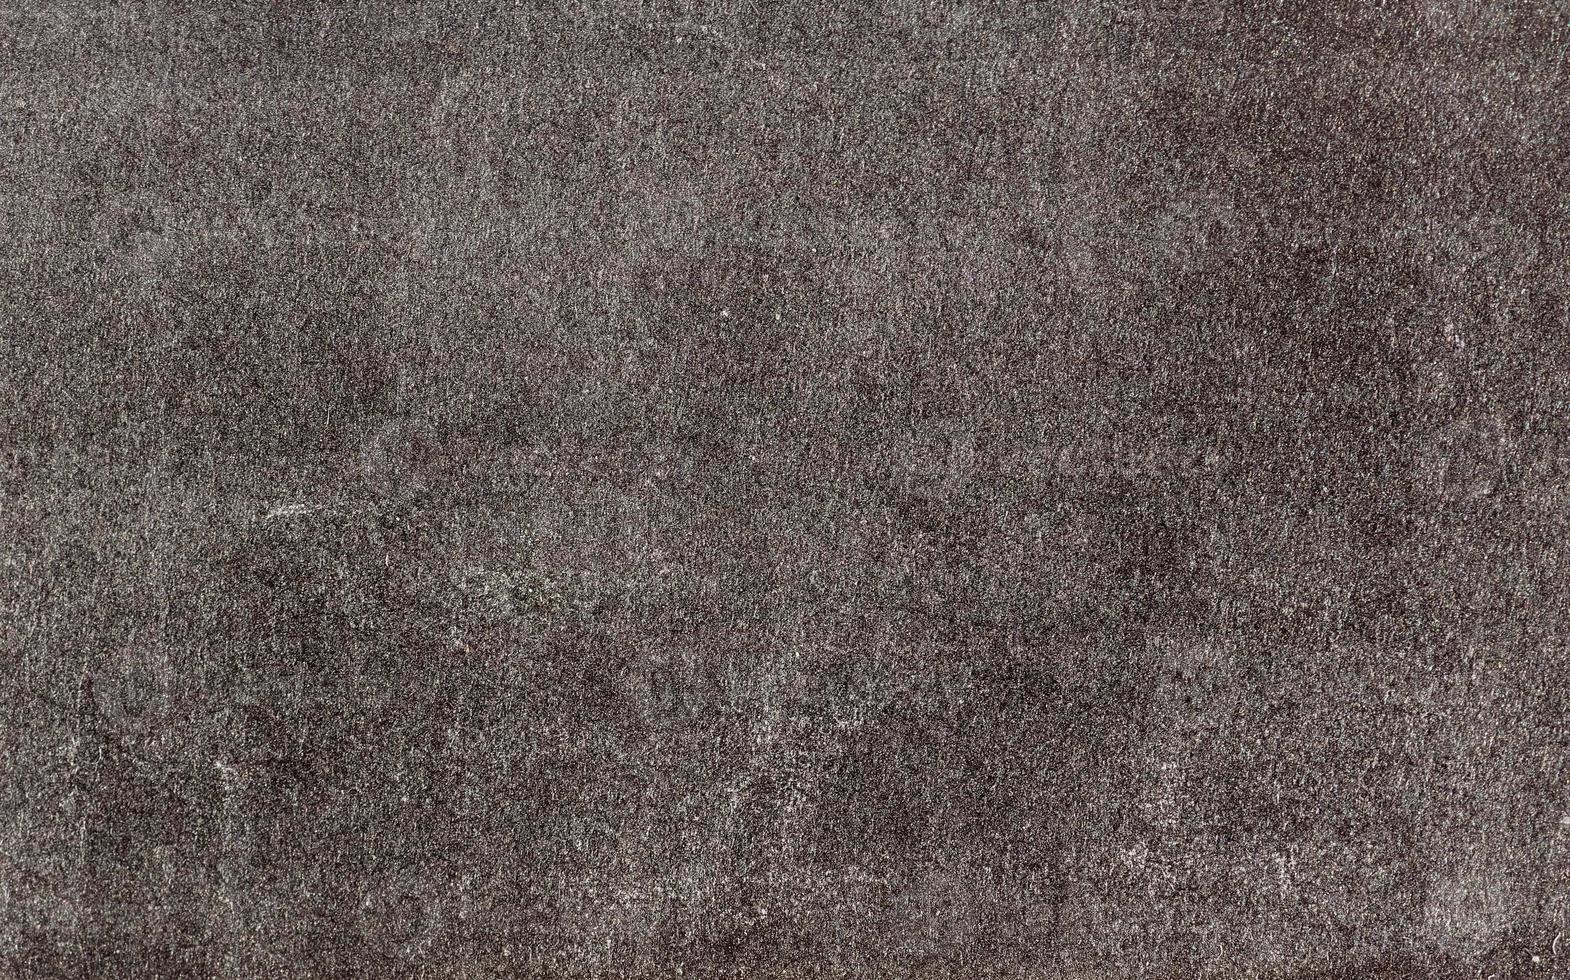 Dirty gray paper texture background photo